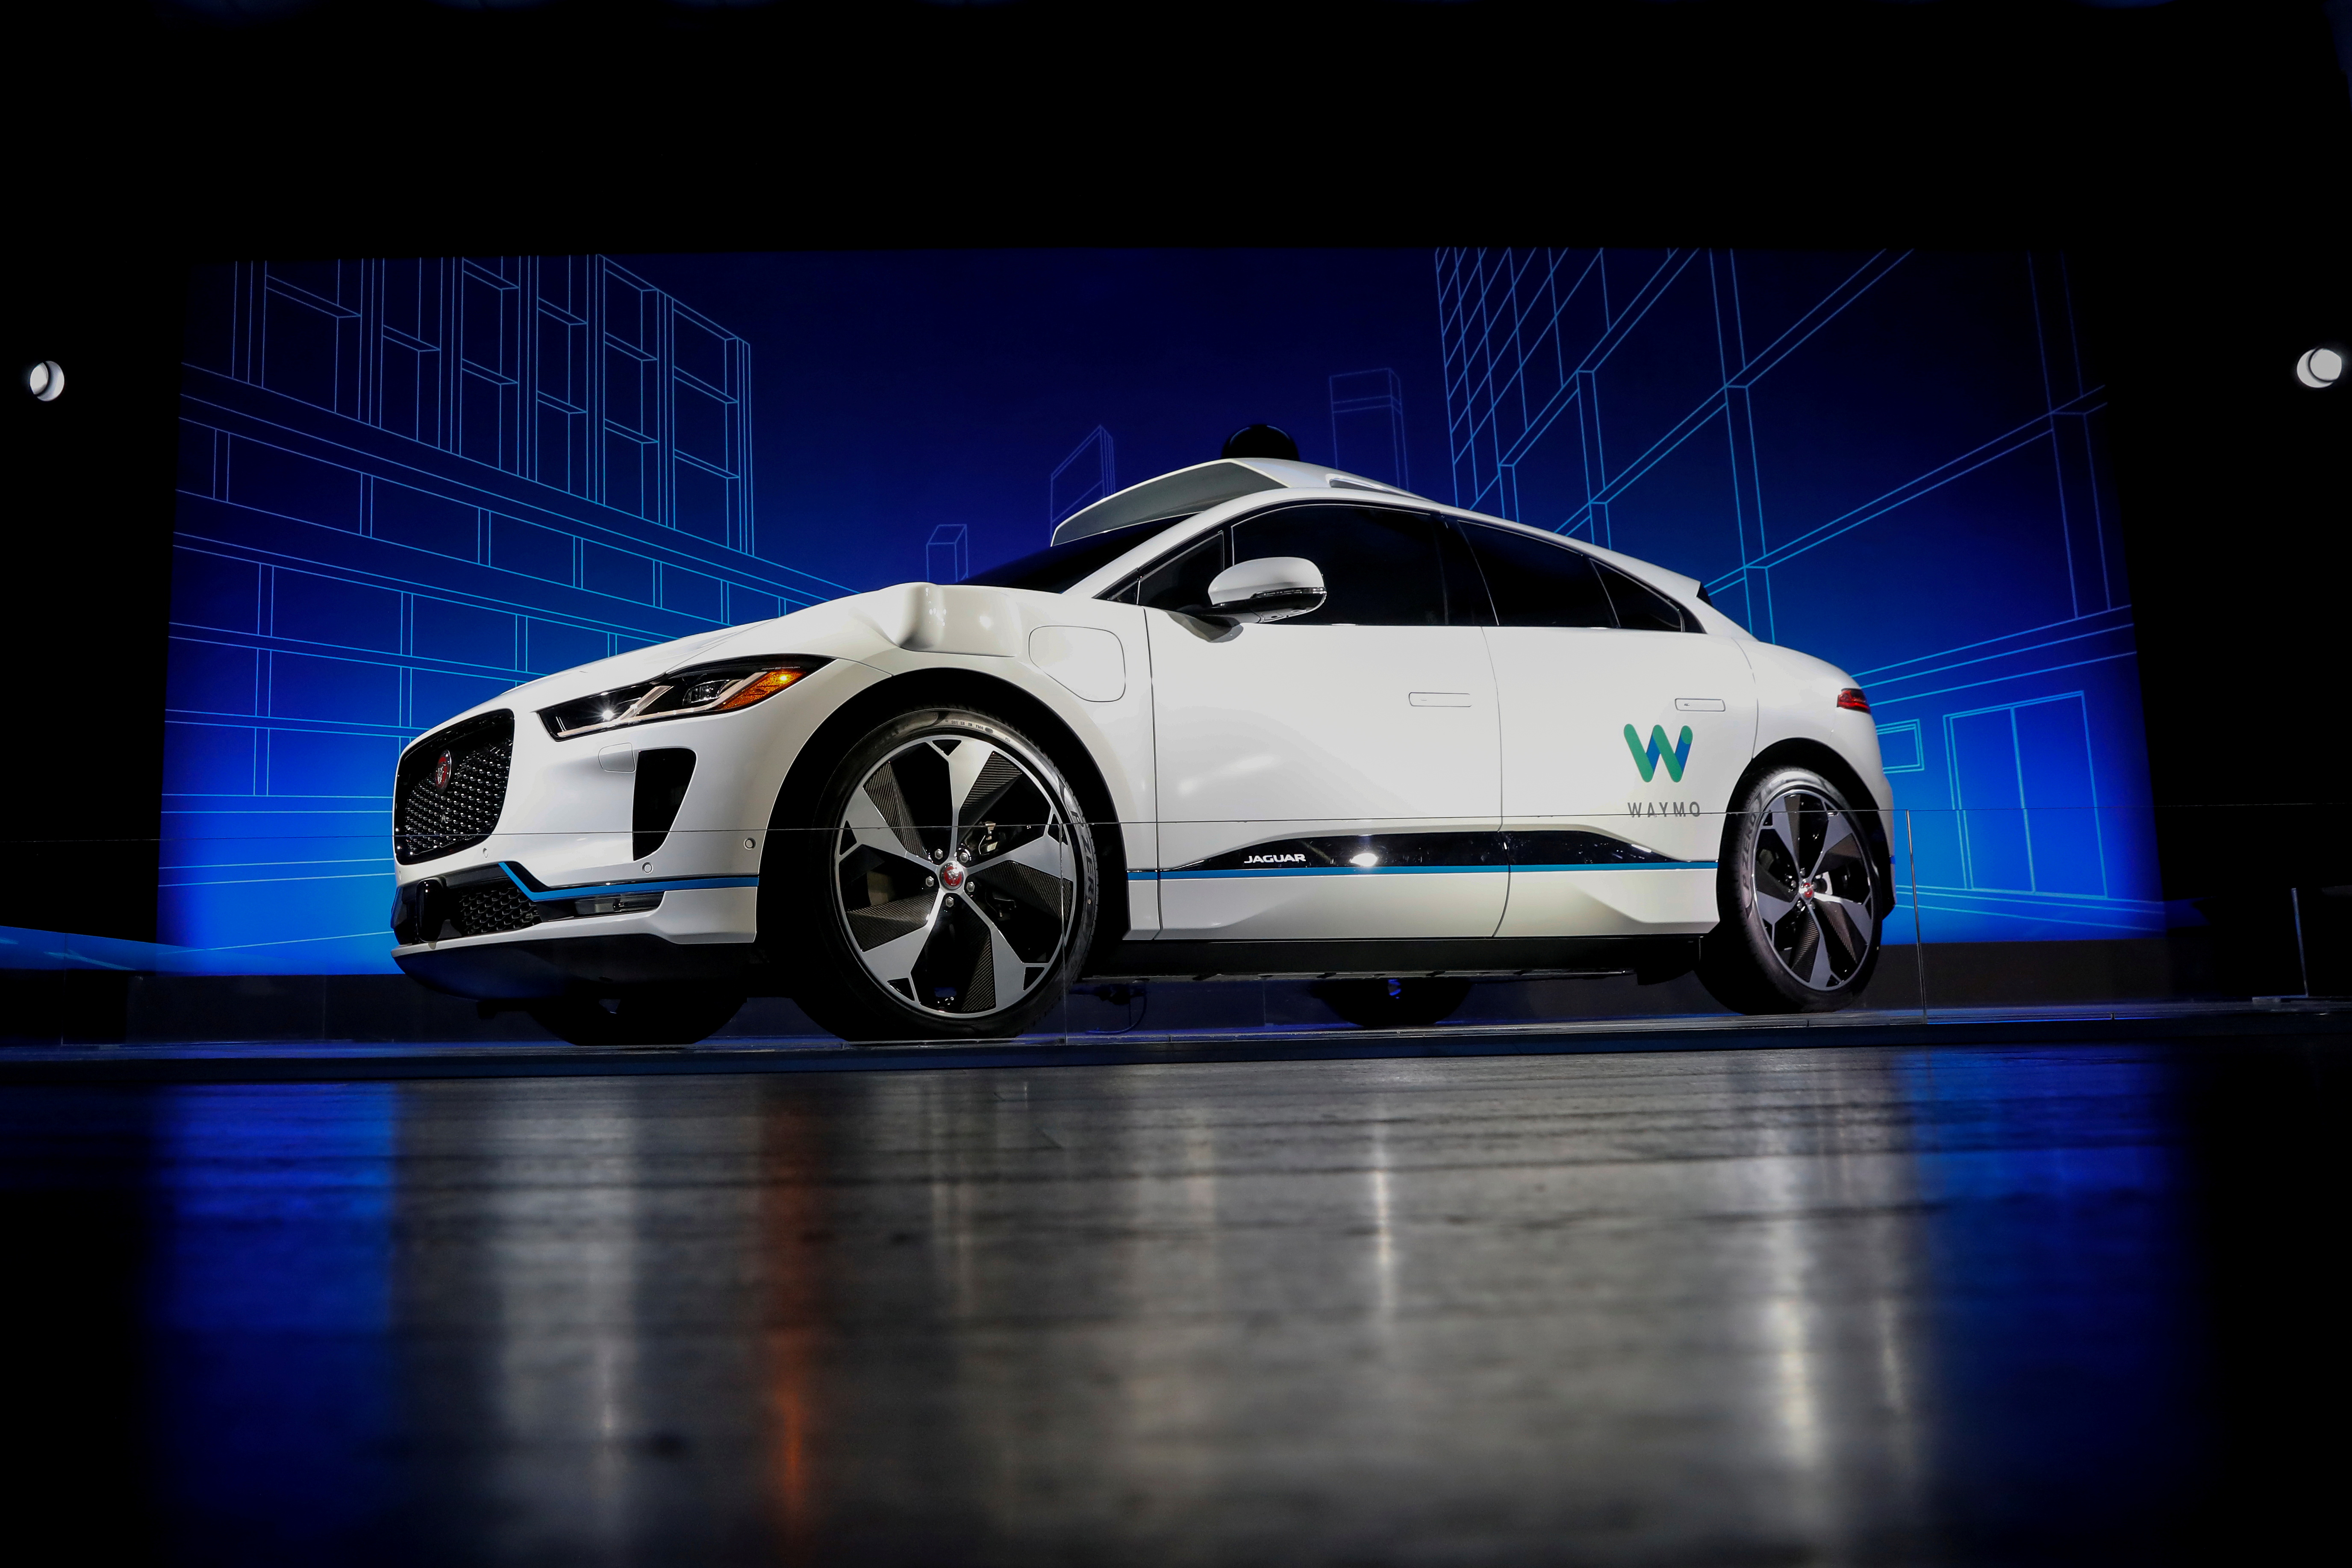 A Jaguar I-PACE self-driving car is pictured during its unveiling by Waymo in the Manhattan borough of New York City, U.S., March 27, 2018. REUTERS/Brendan McDermid